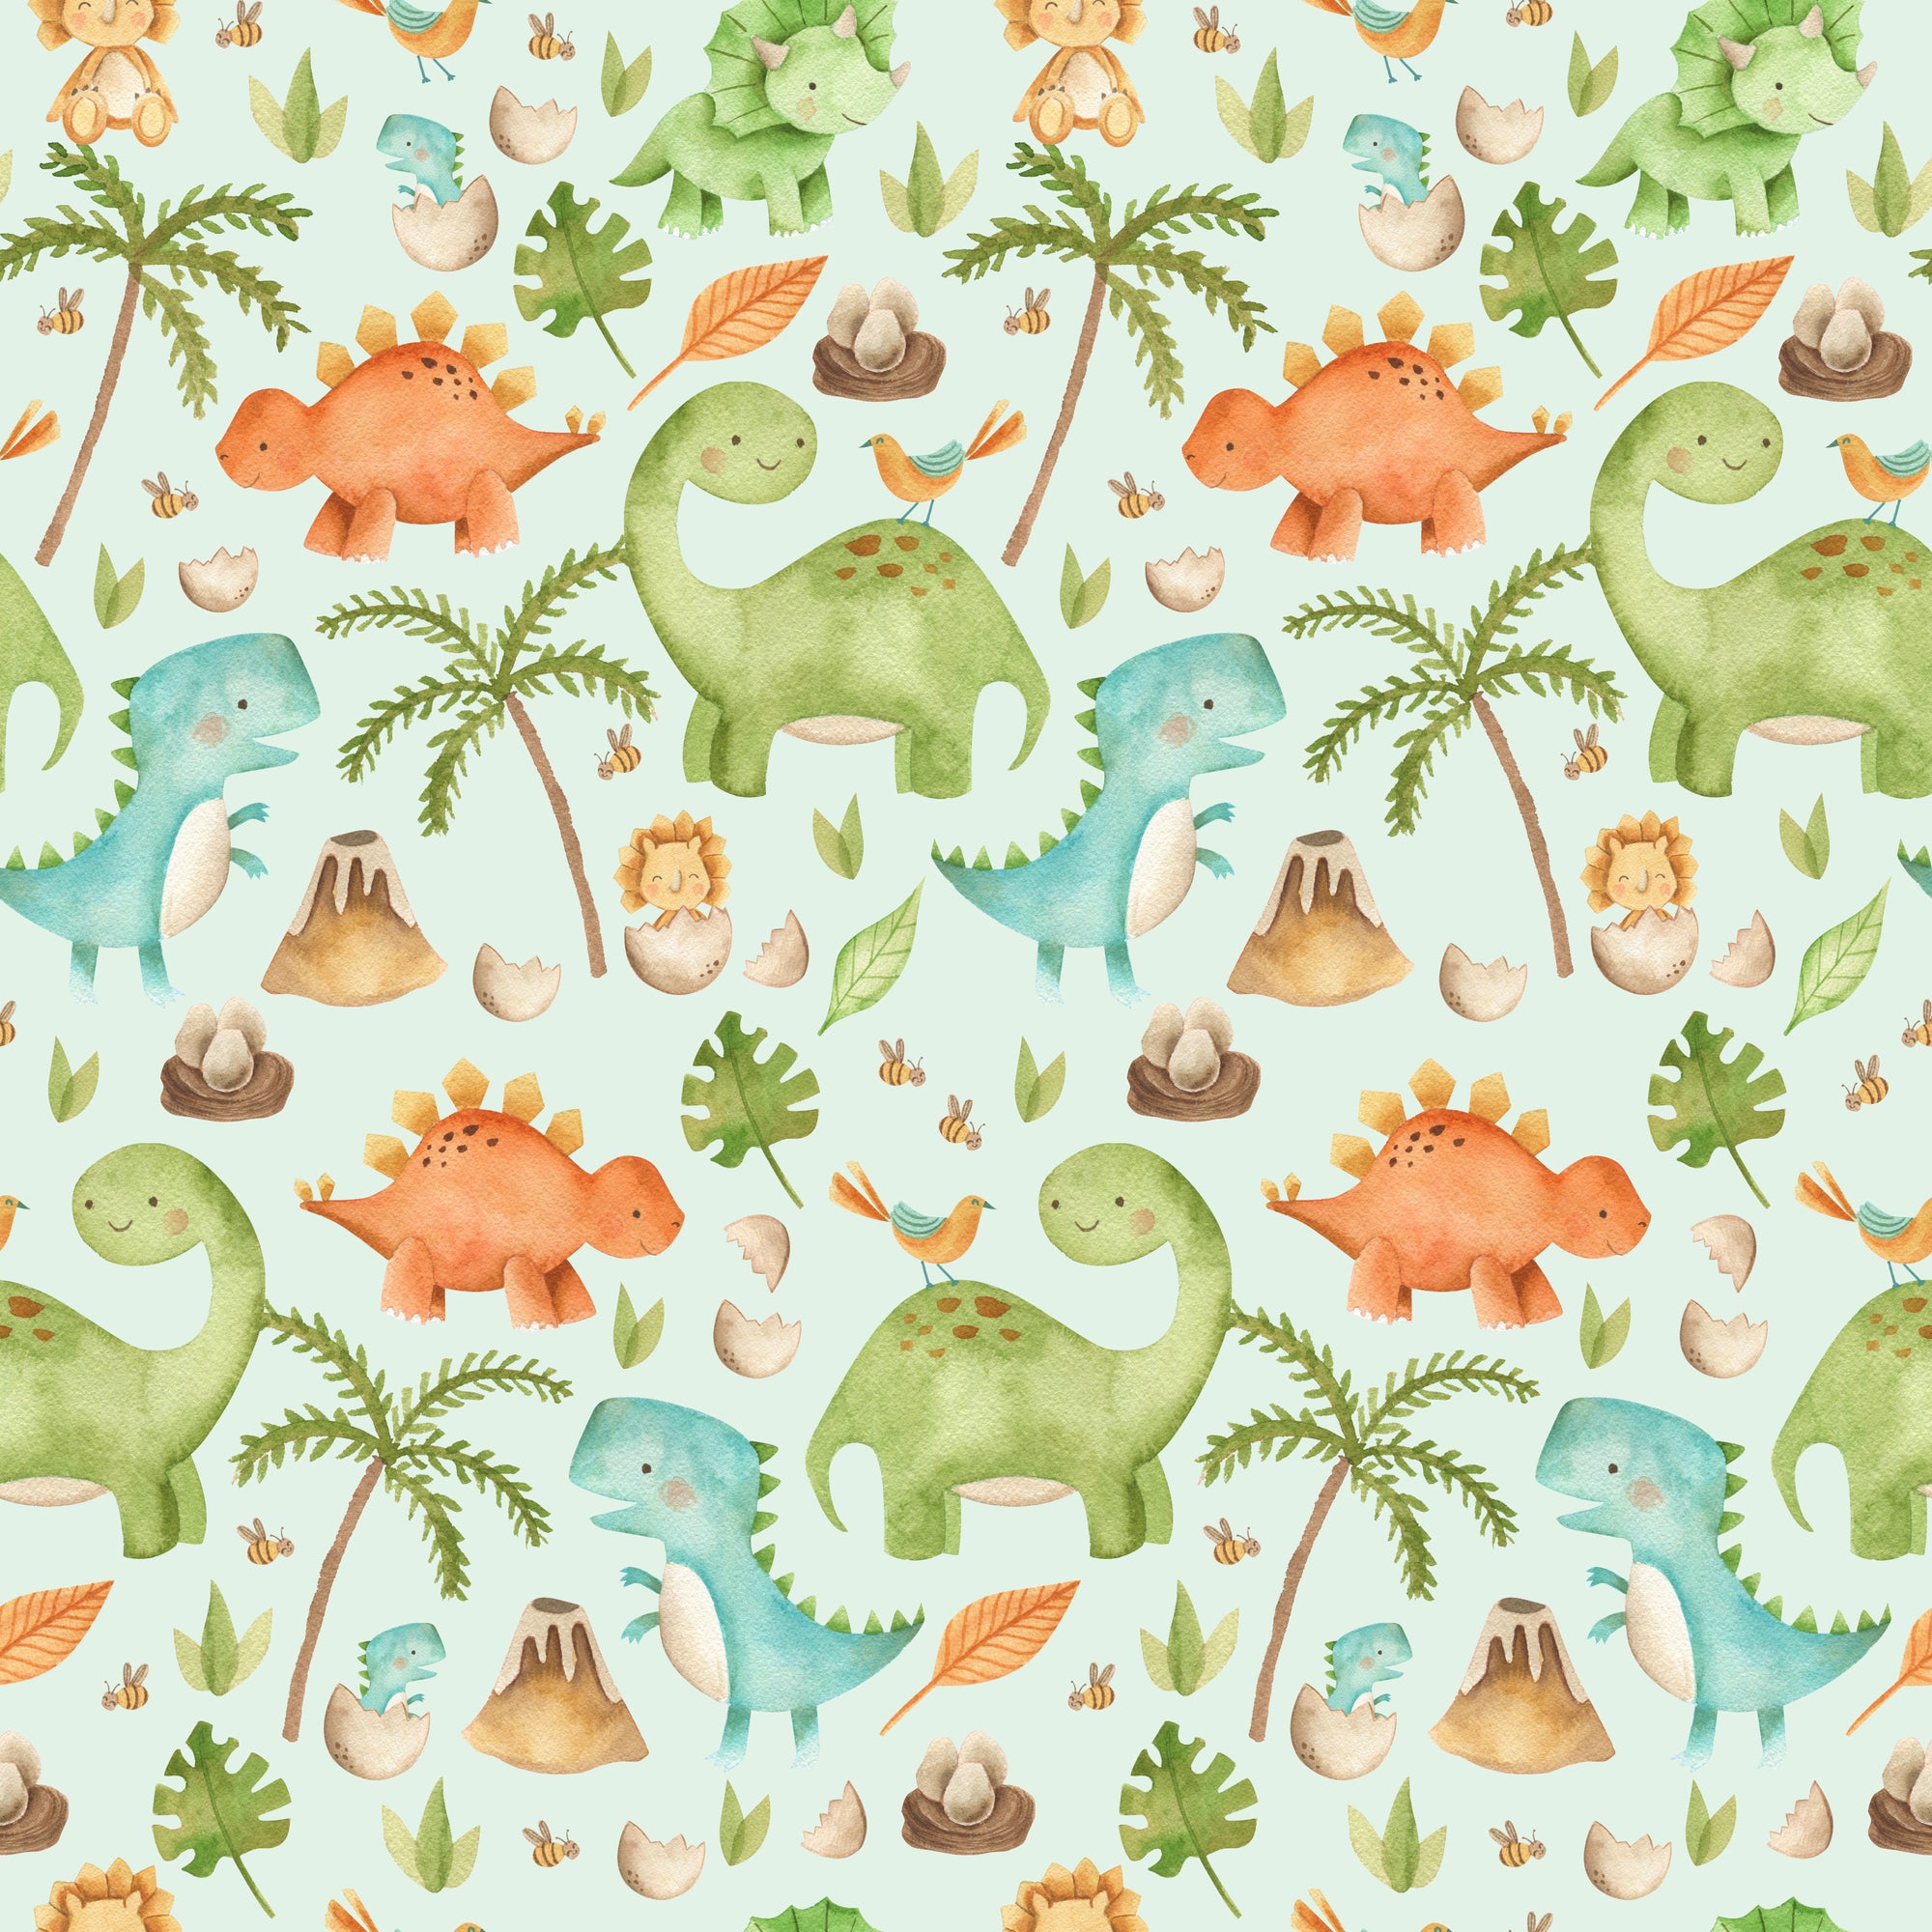 Baby Dinosaurs Enjoying the Planet - Wrapping Paper